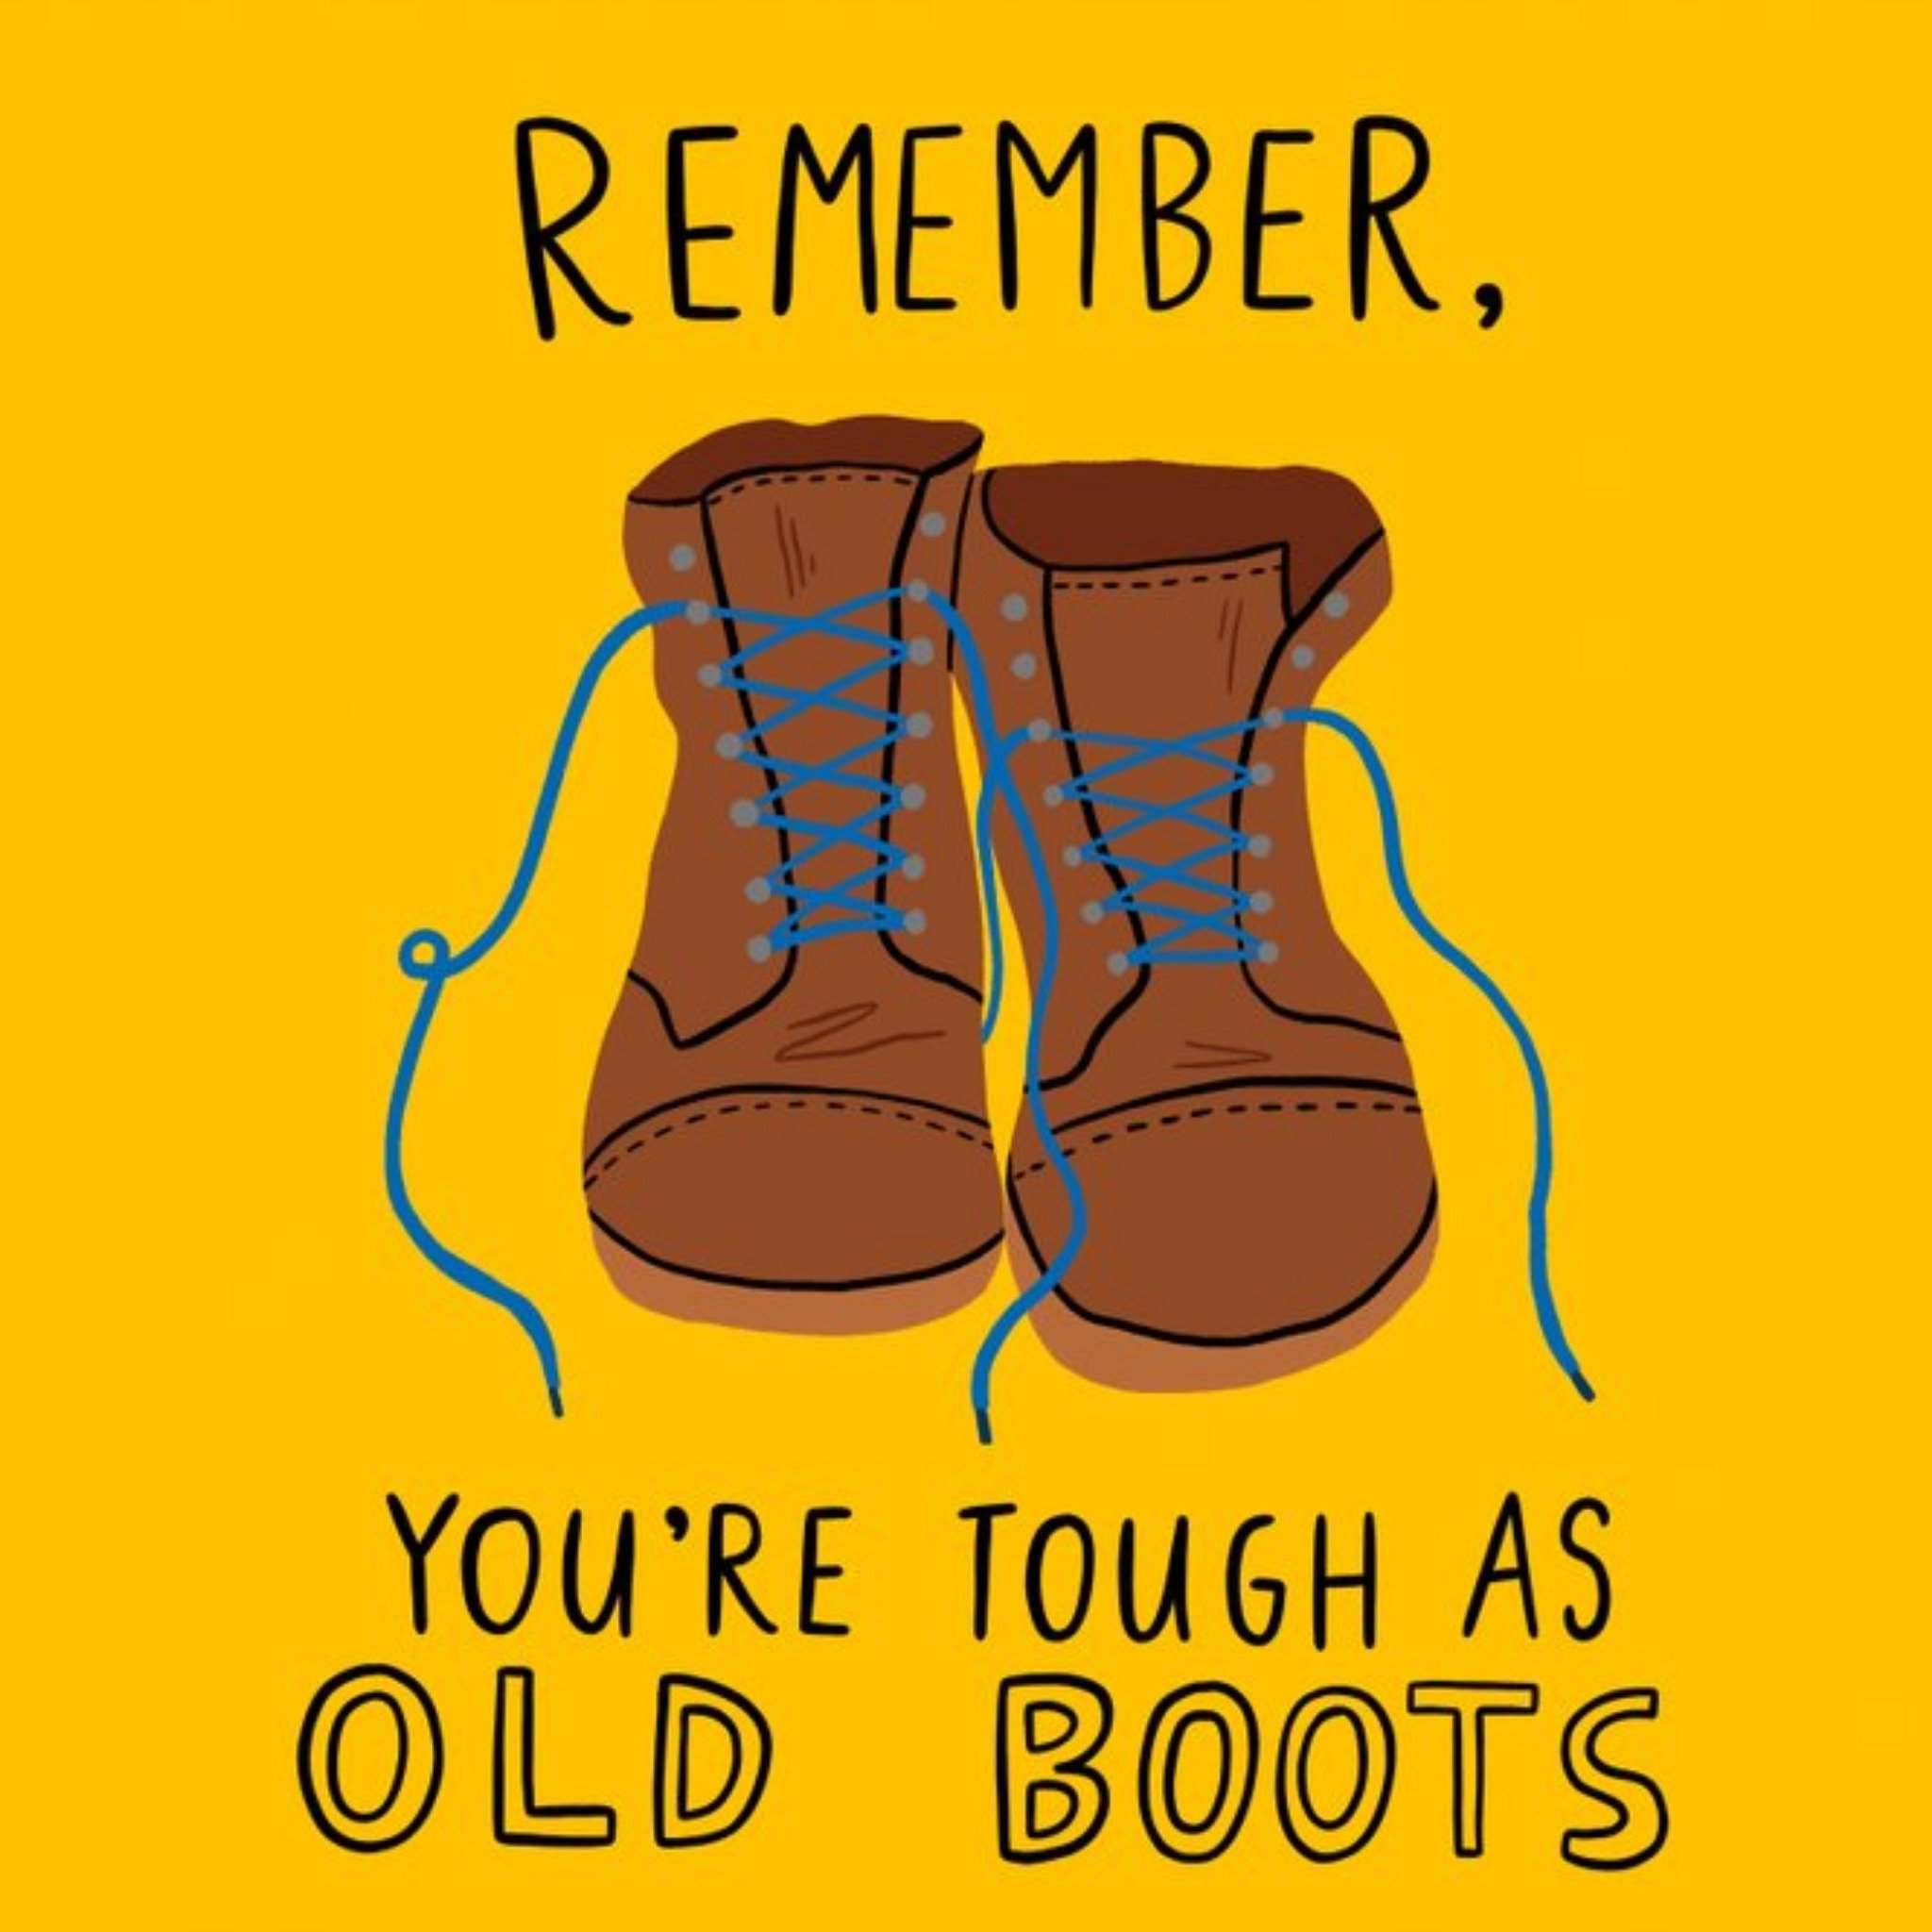 Moonpig Kapow Illustration Of Some Old Boots Remember, You're Tough As Old Boots Card, Large